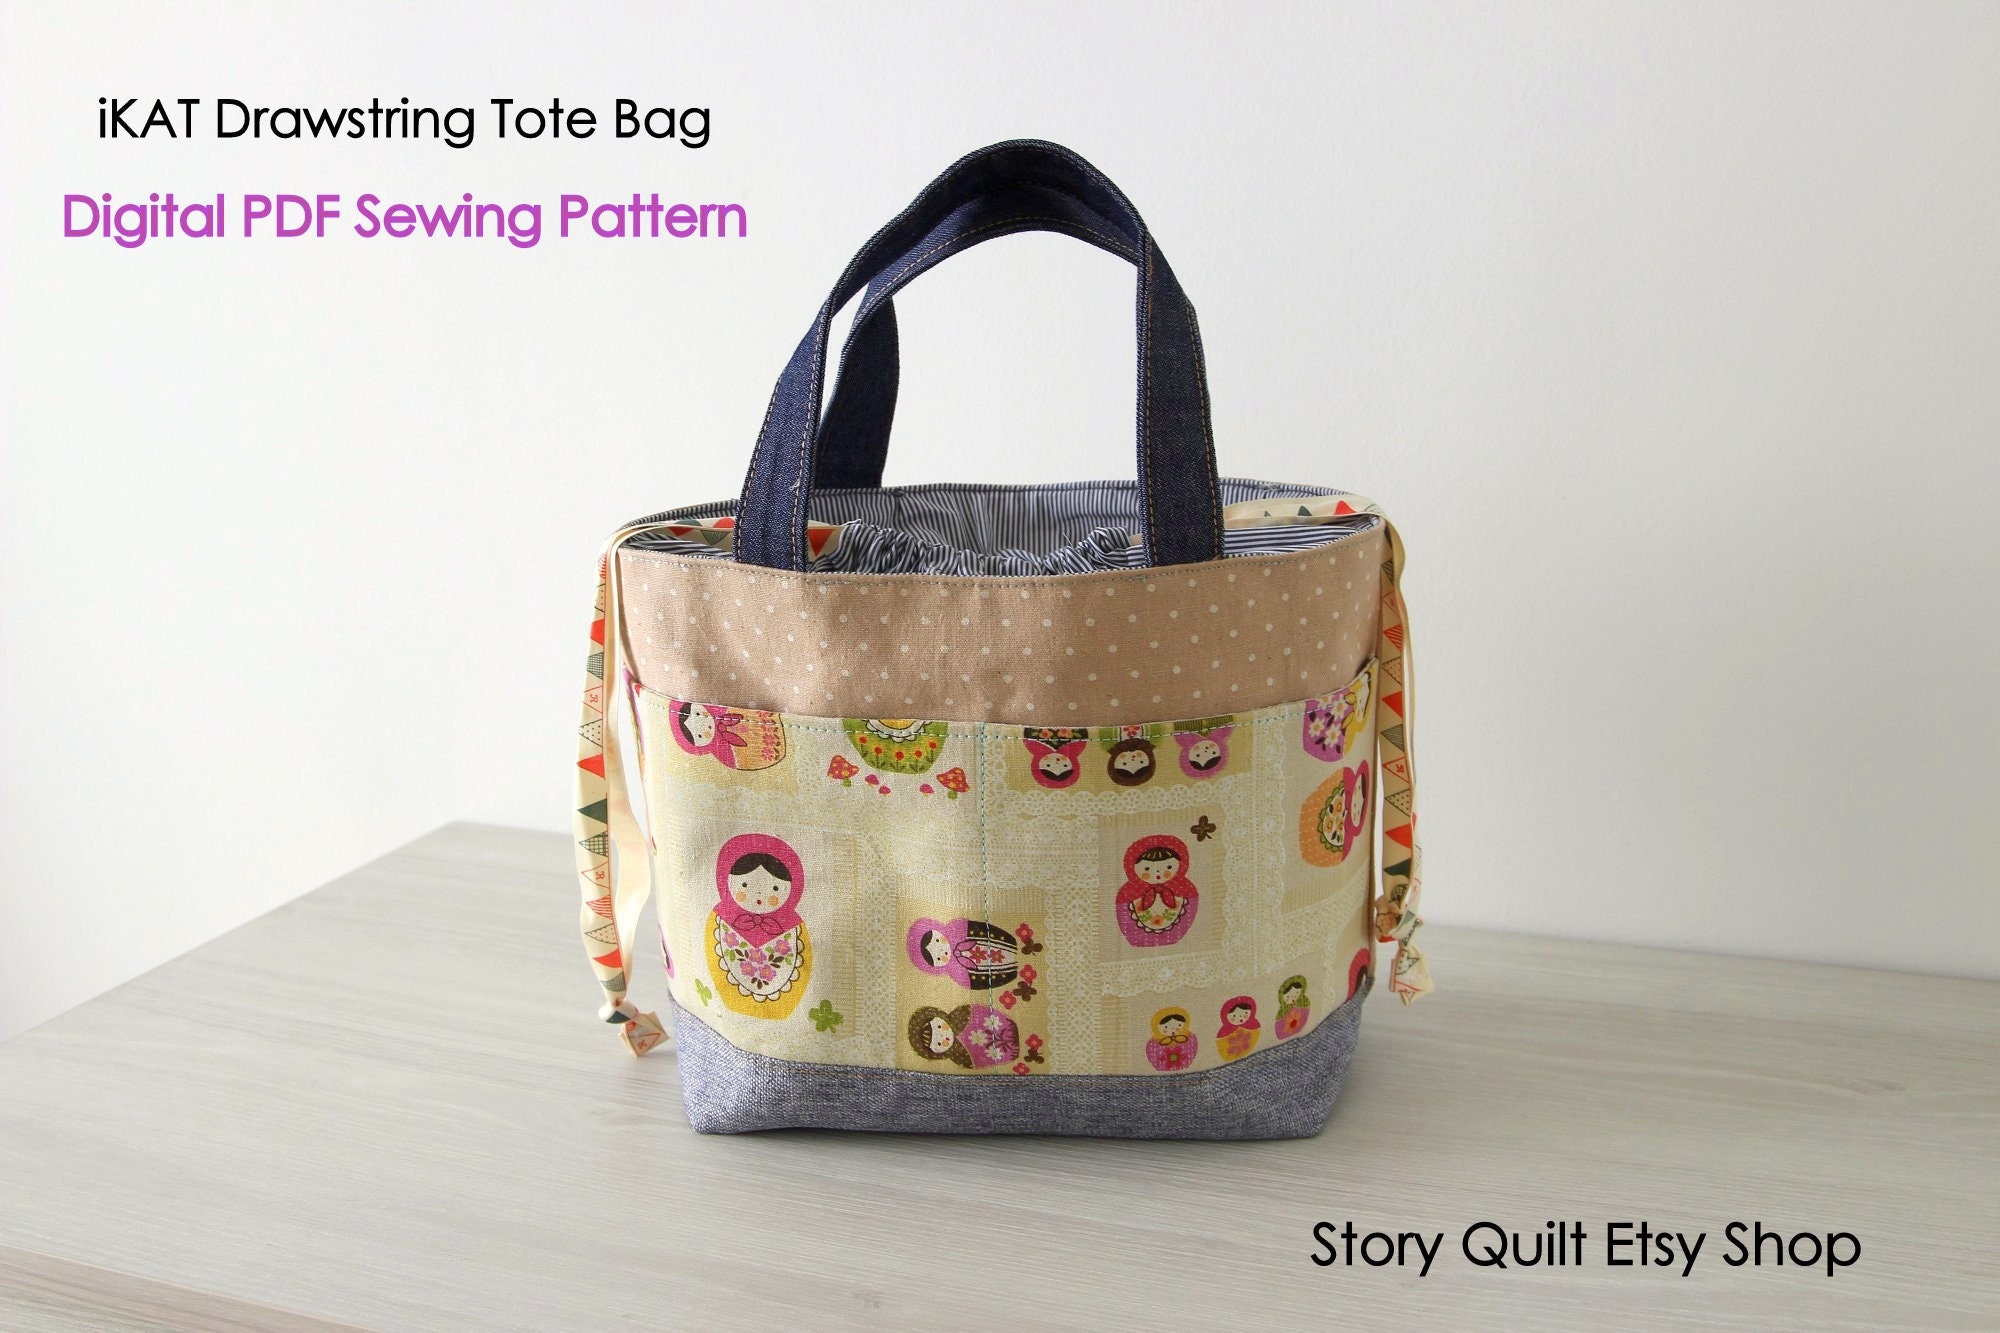 Sewing Pattern for Project Organizer Tote Bags, Kwik Sew Pattern K4371, Craft  Tote Bag, Sewing Bag, Knitting Bag, Craft Bag, Tote Bag, K182 